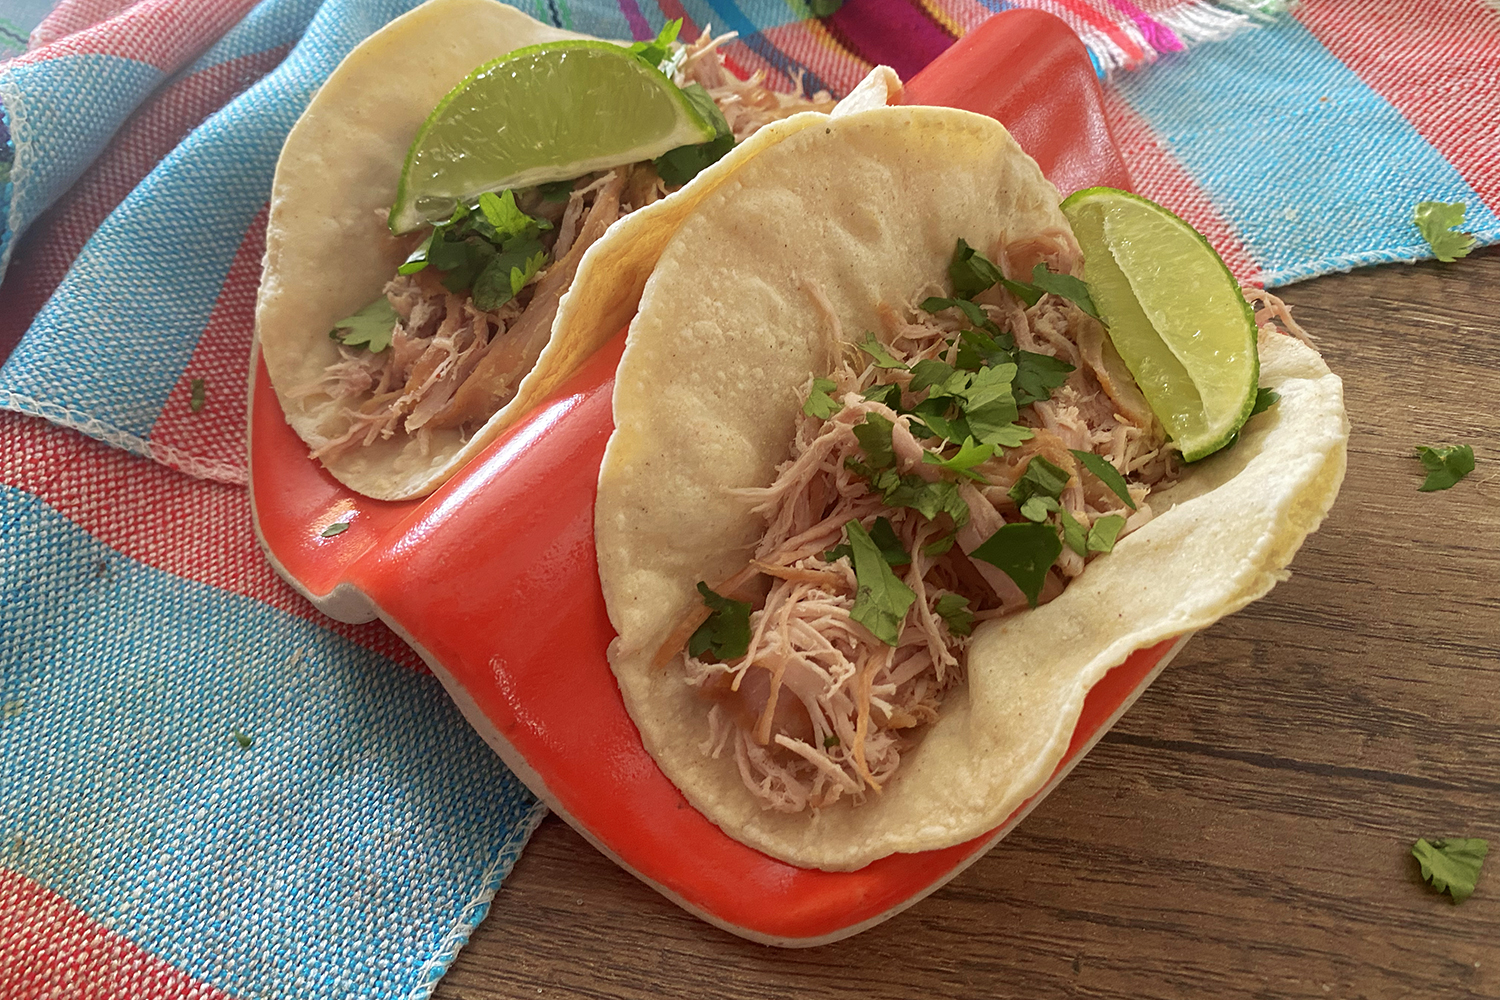 red plate with two tacos on it and limes